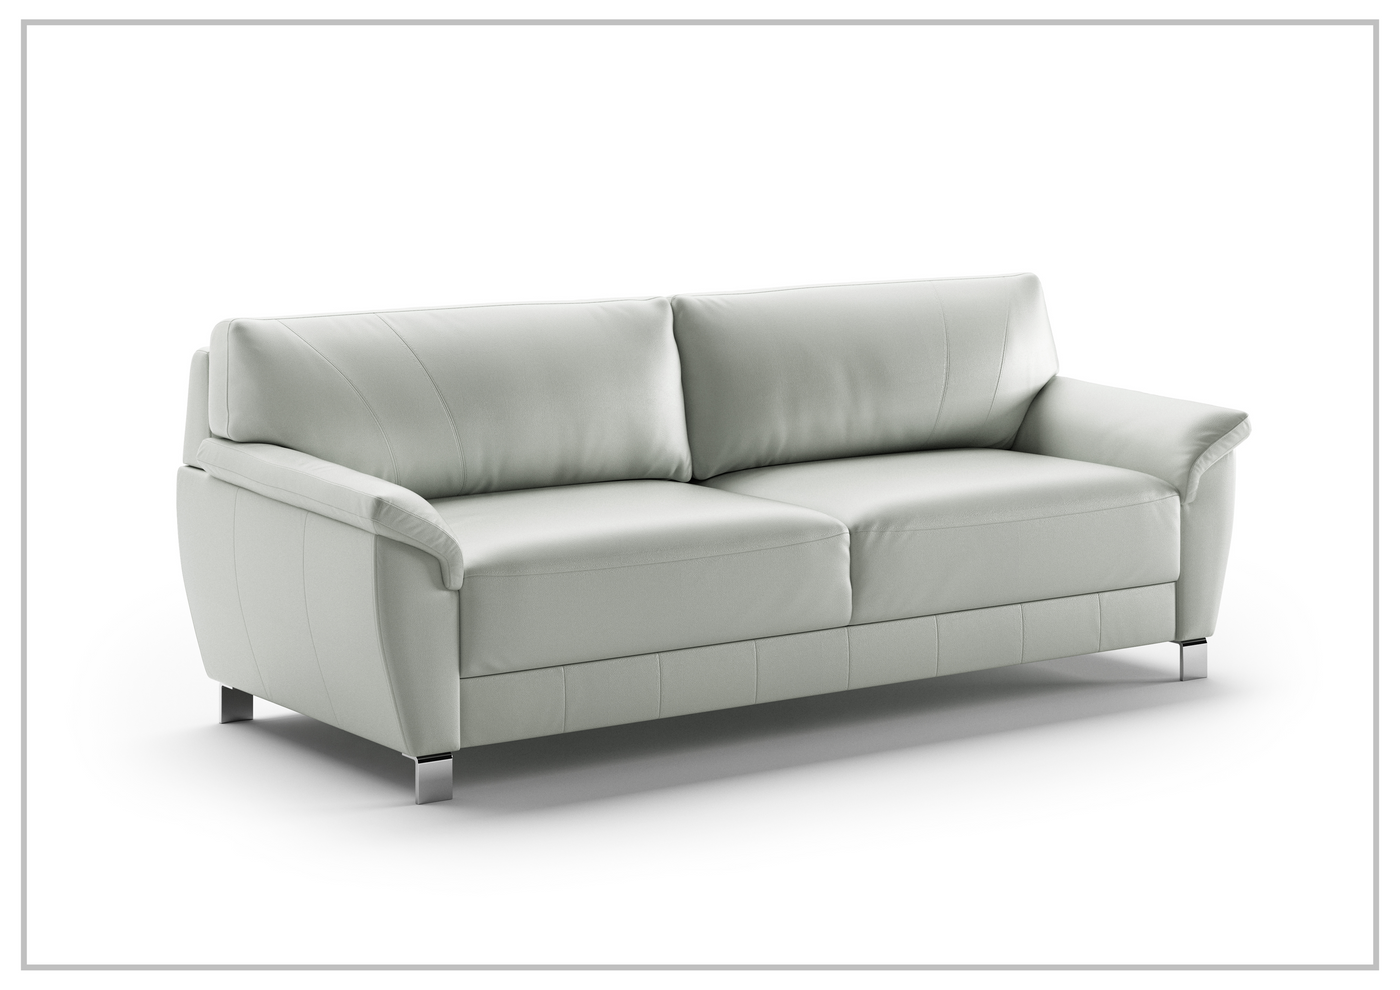 Luonto Grace Full-XL Leather Sleeper Sofa with Flip Function